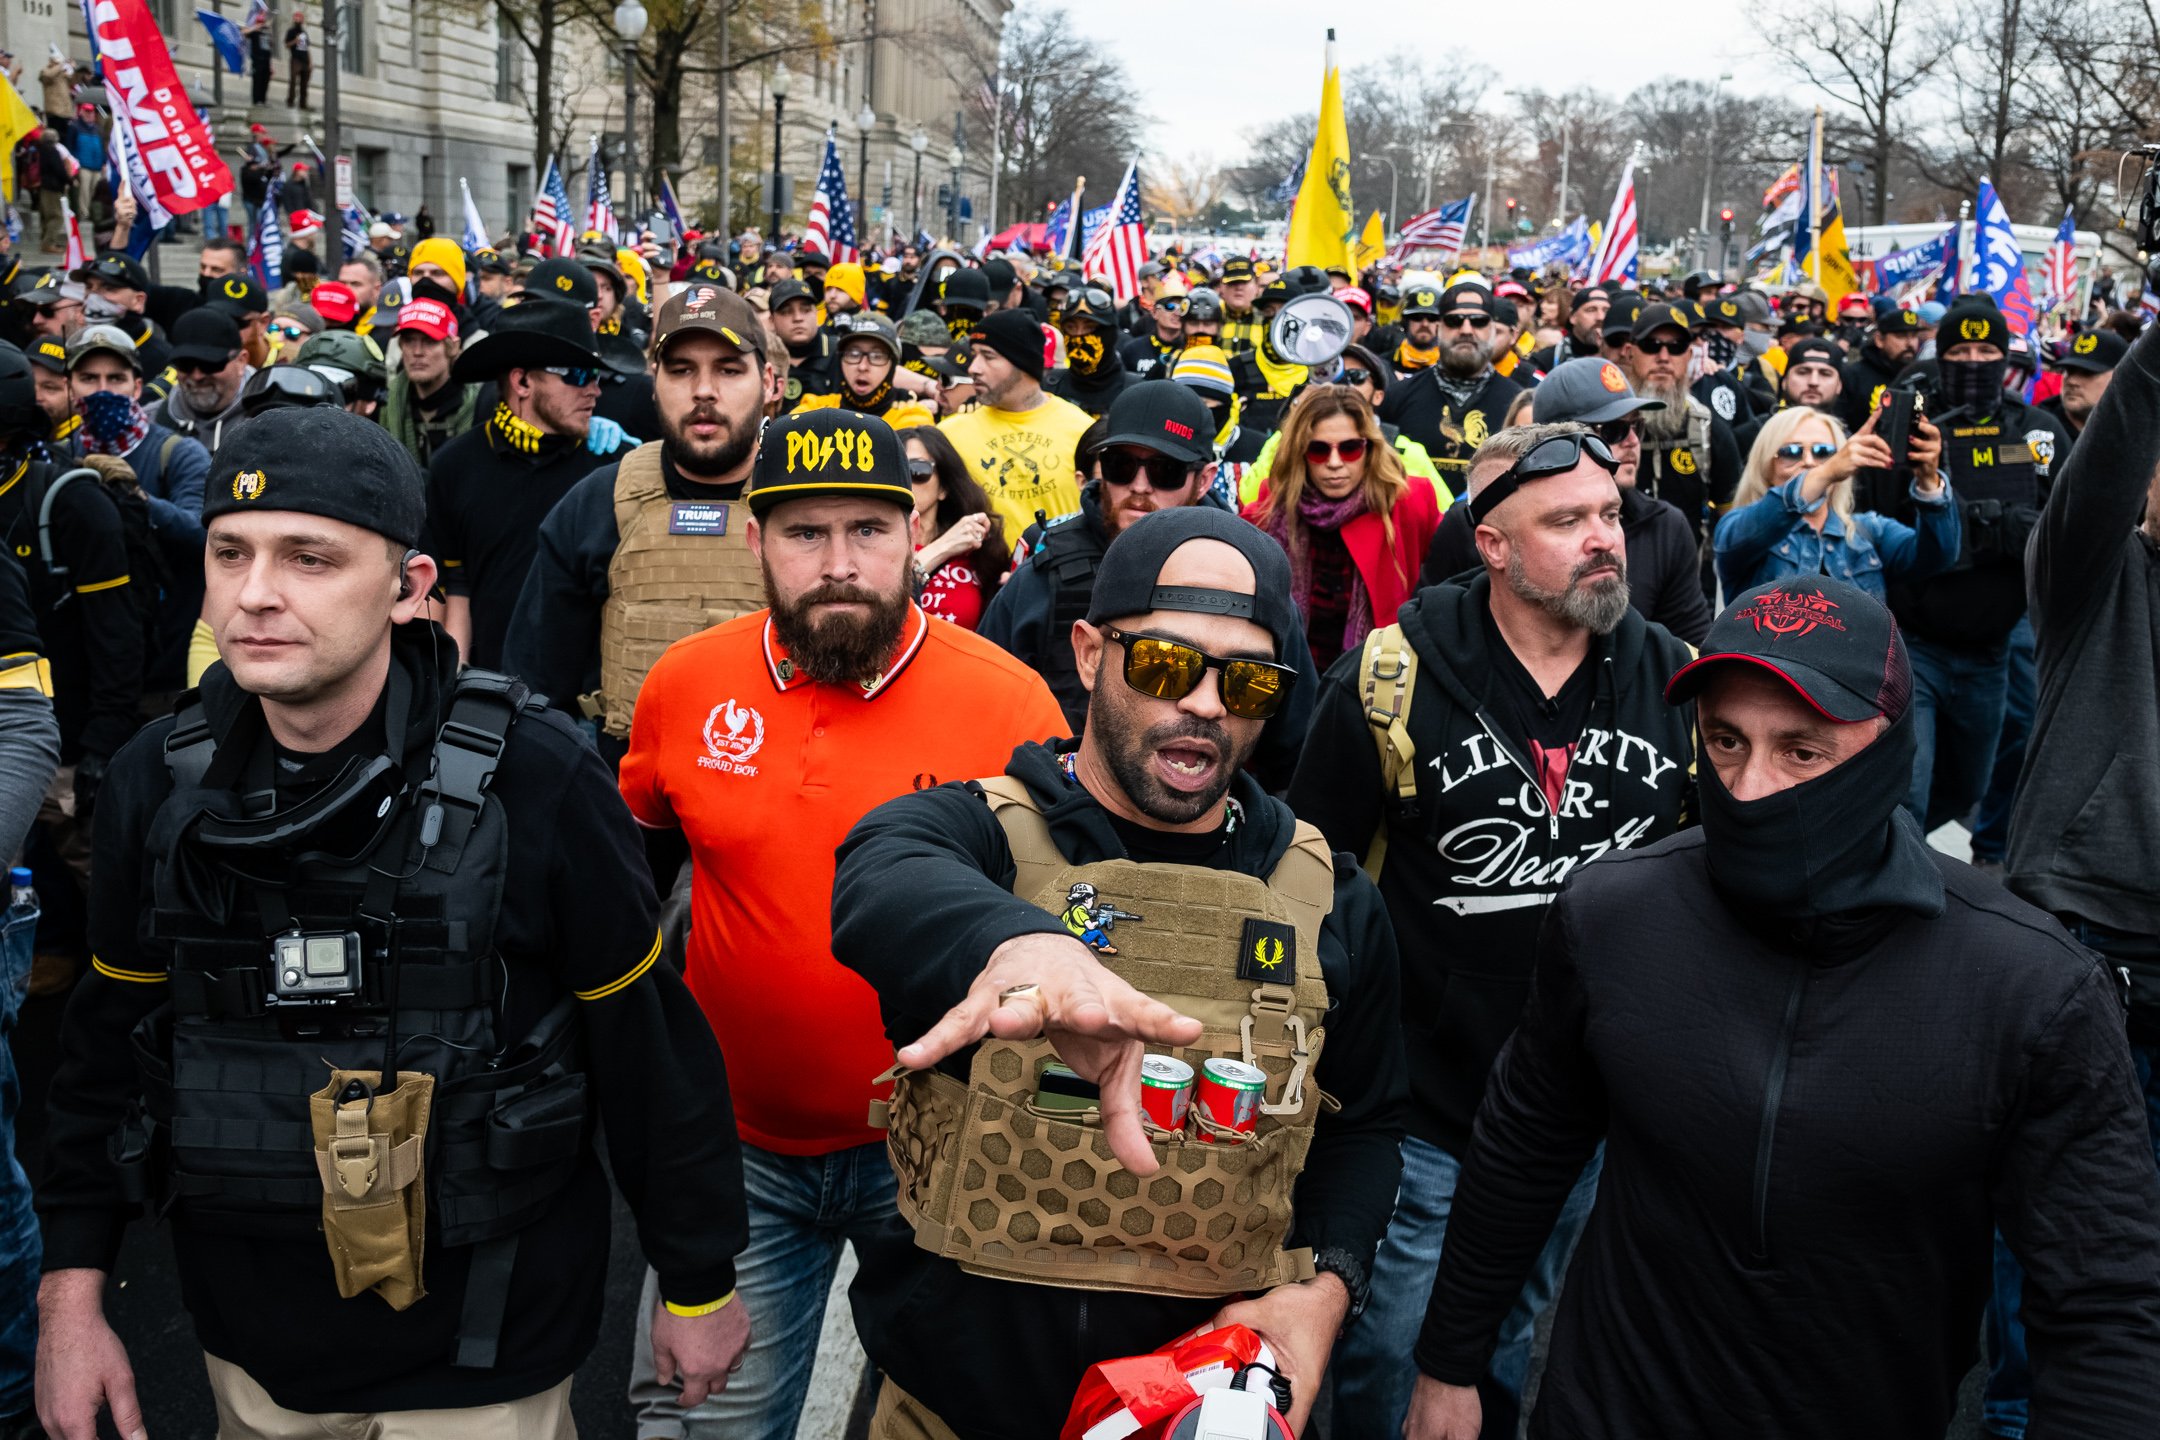  Enrique Tarrio, leader of the Proud Boys, leads a group of Pro-Trump protesters wearing Proud Boys attire in Freedom Plaza during the "Million MAGA March" in Washington, D.C., on December 12, 2020. (Graeme Sloan for Bloomberg) 